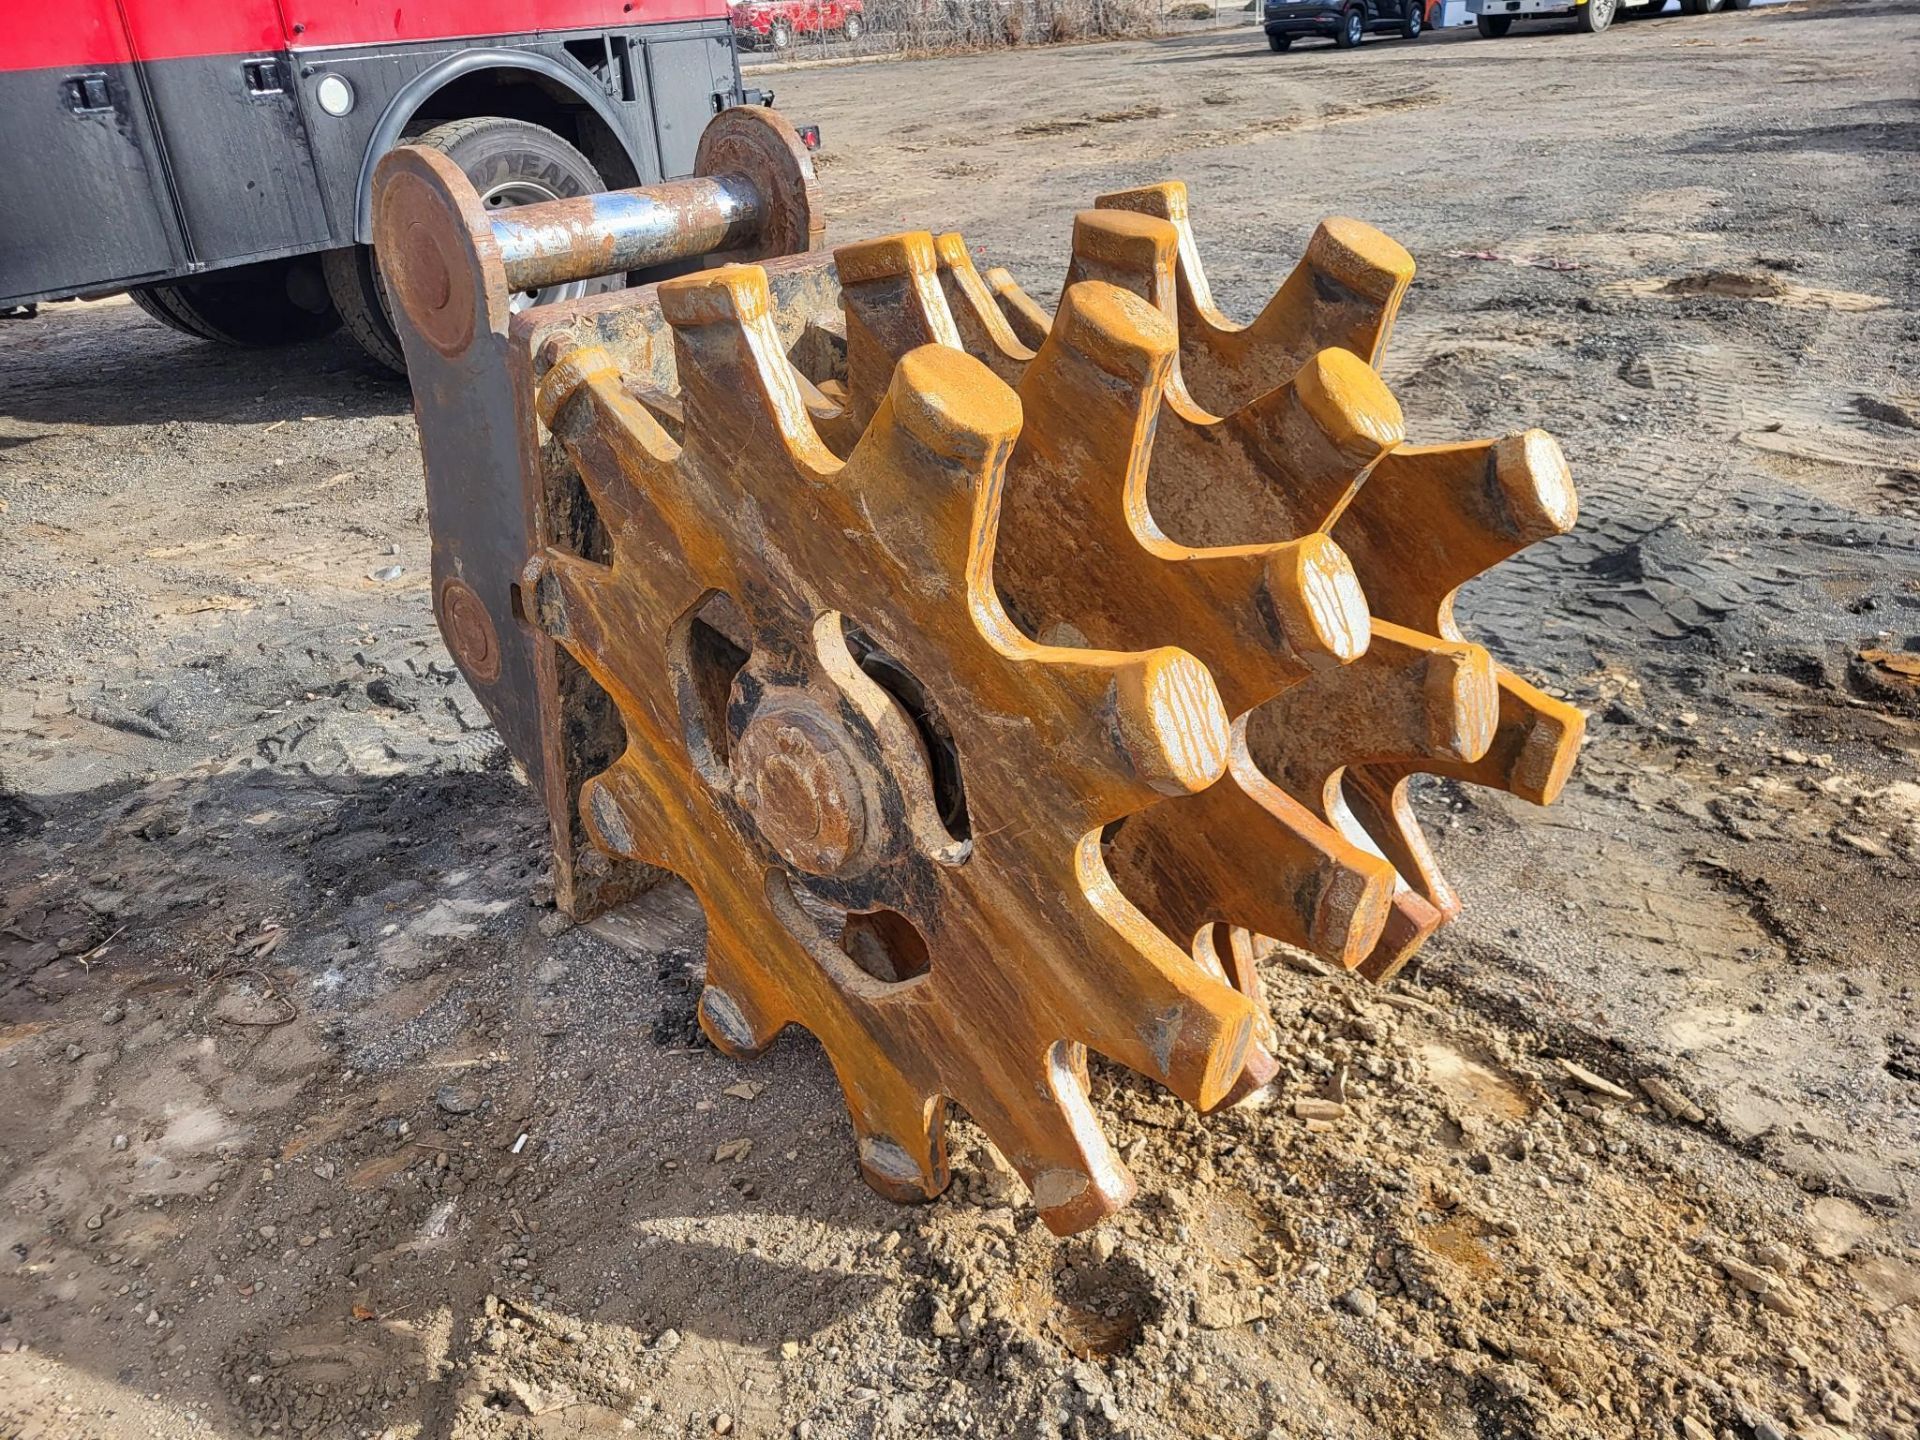 42" X 30" SHEEPSFOOT COMPACTOR WHEEL ATTACHMENT - Image 2 of 9